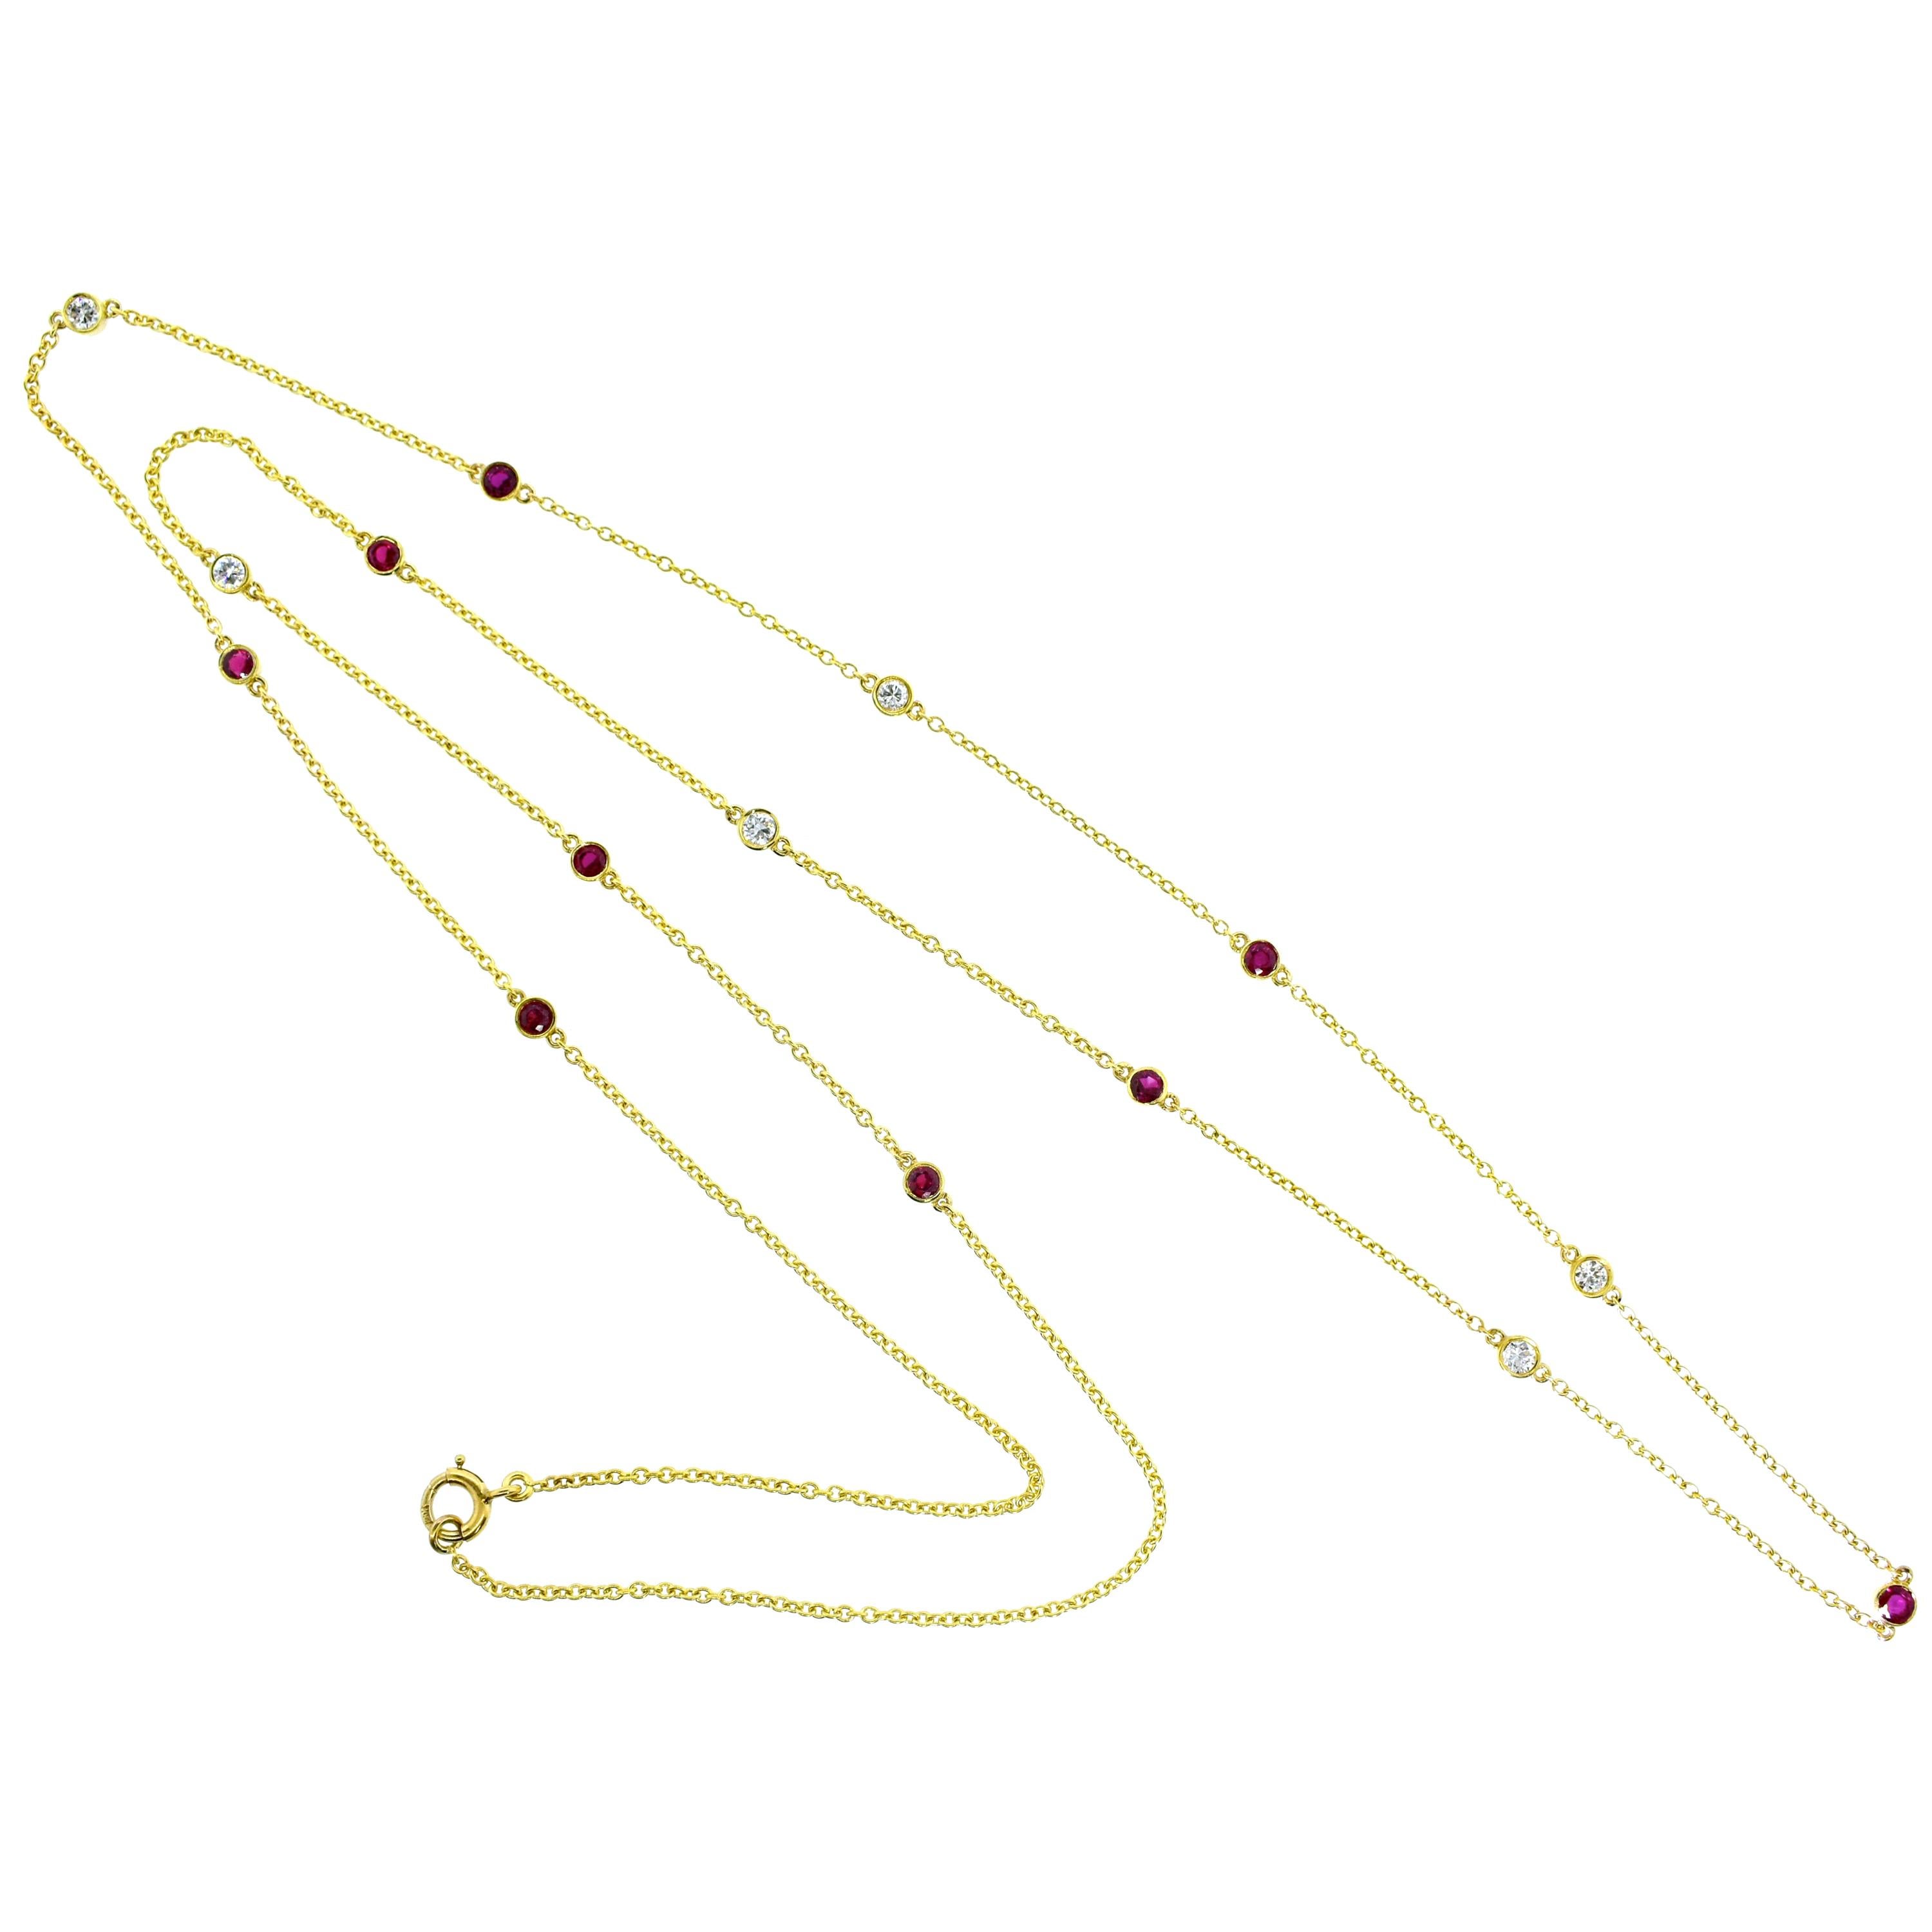 Ruby and diamond long gold chain, 30 inches in length, weighing 5.85 grams.  There are 6 round brilliant cut diamonds all H color and VS in clarity.  The total diamond weight is .50 cts., there are 9 fine red natural rubies all matching well in